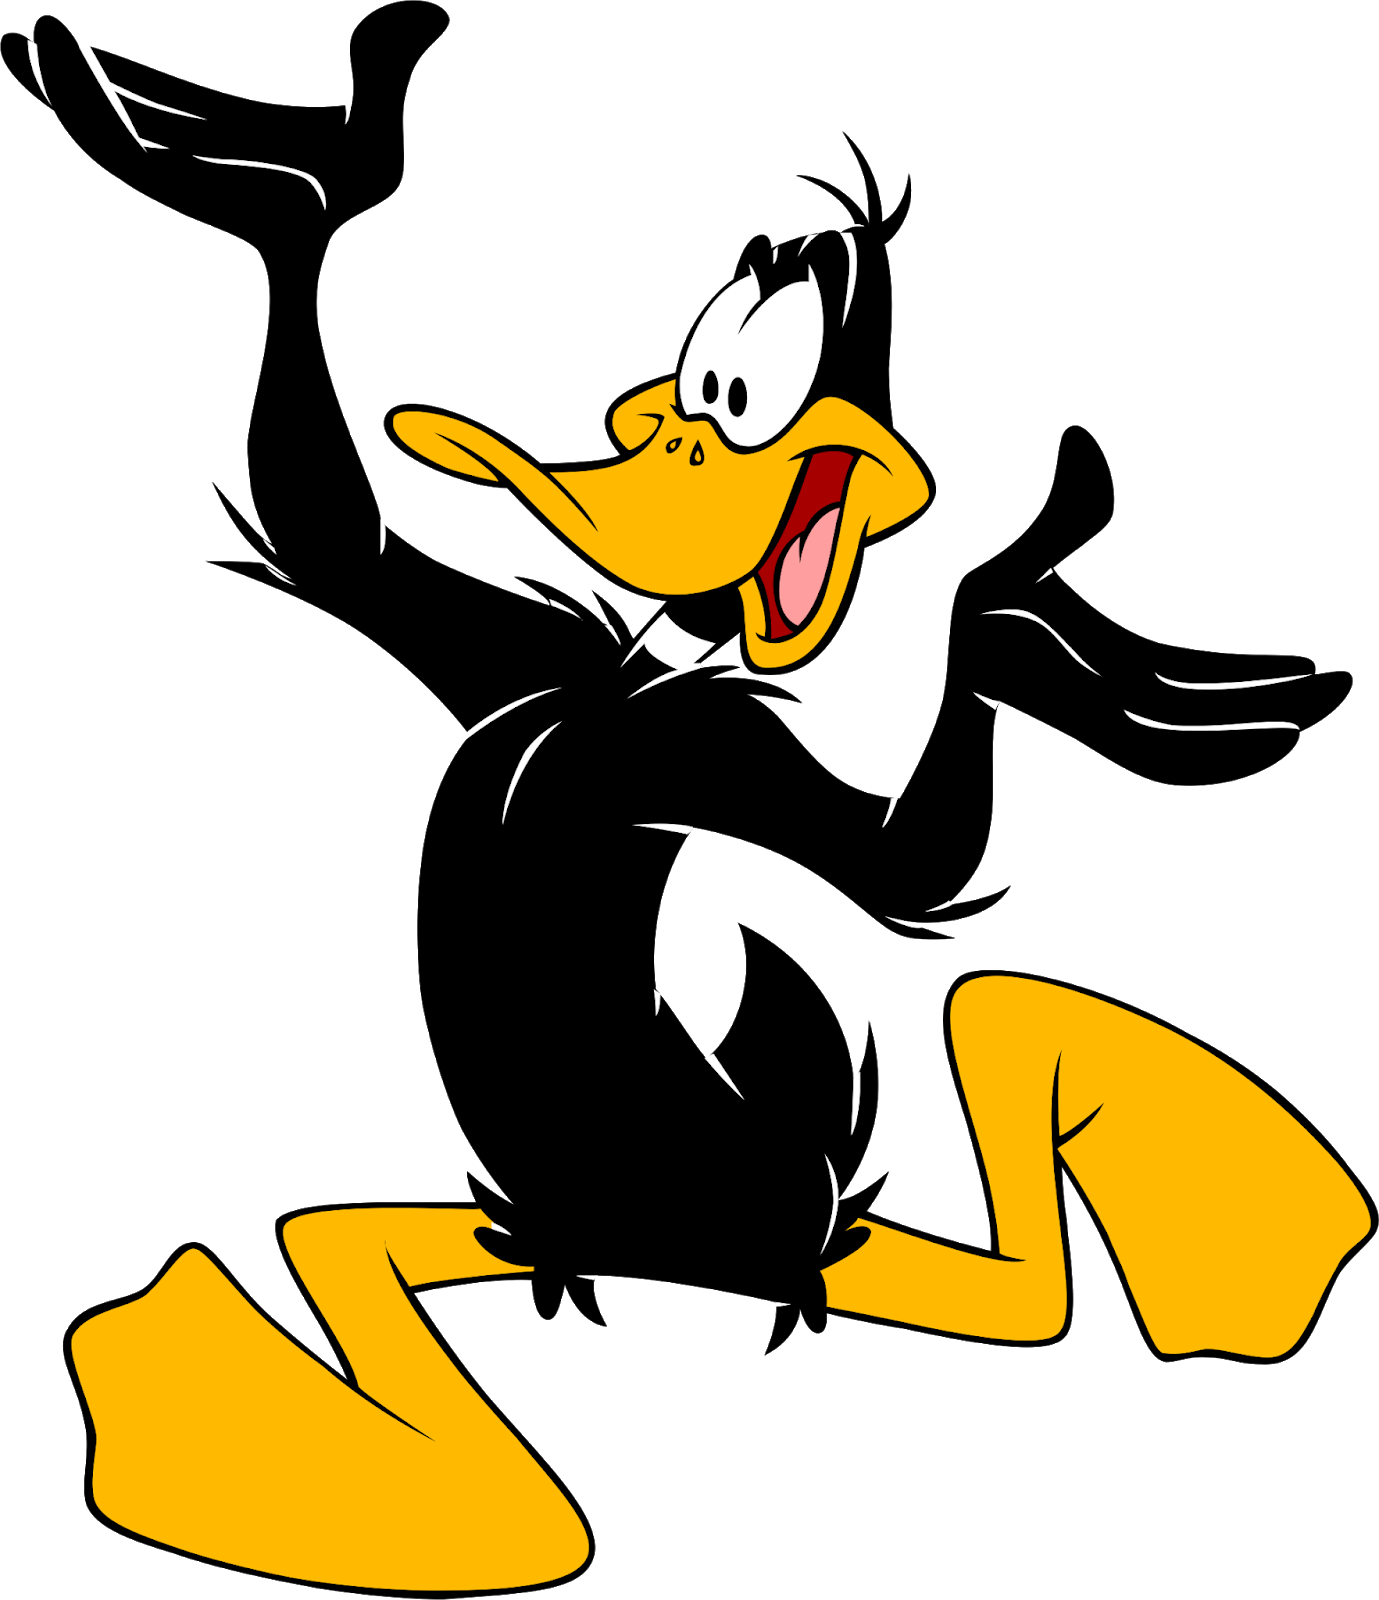 Daffy Duck PNG Image File